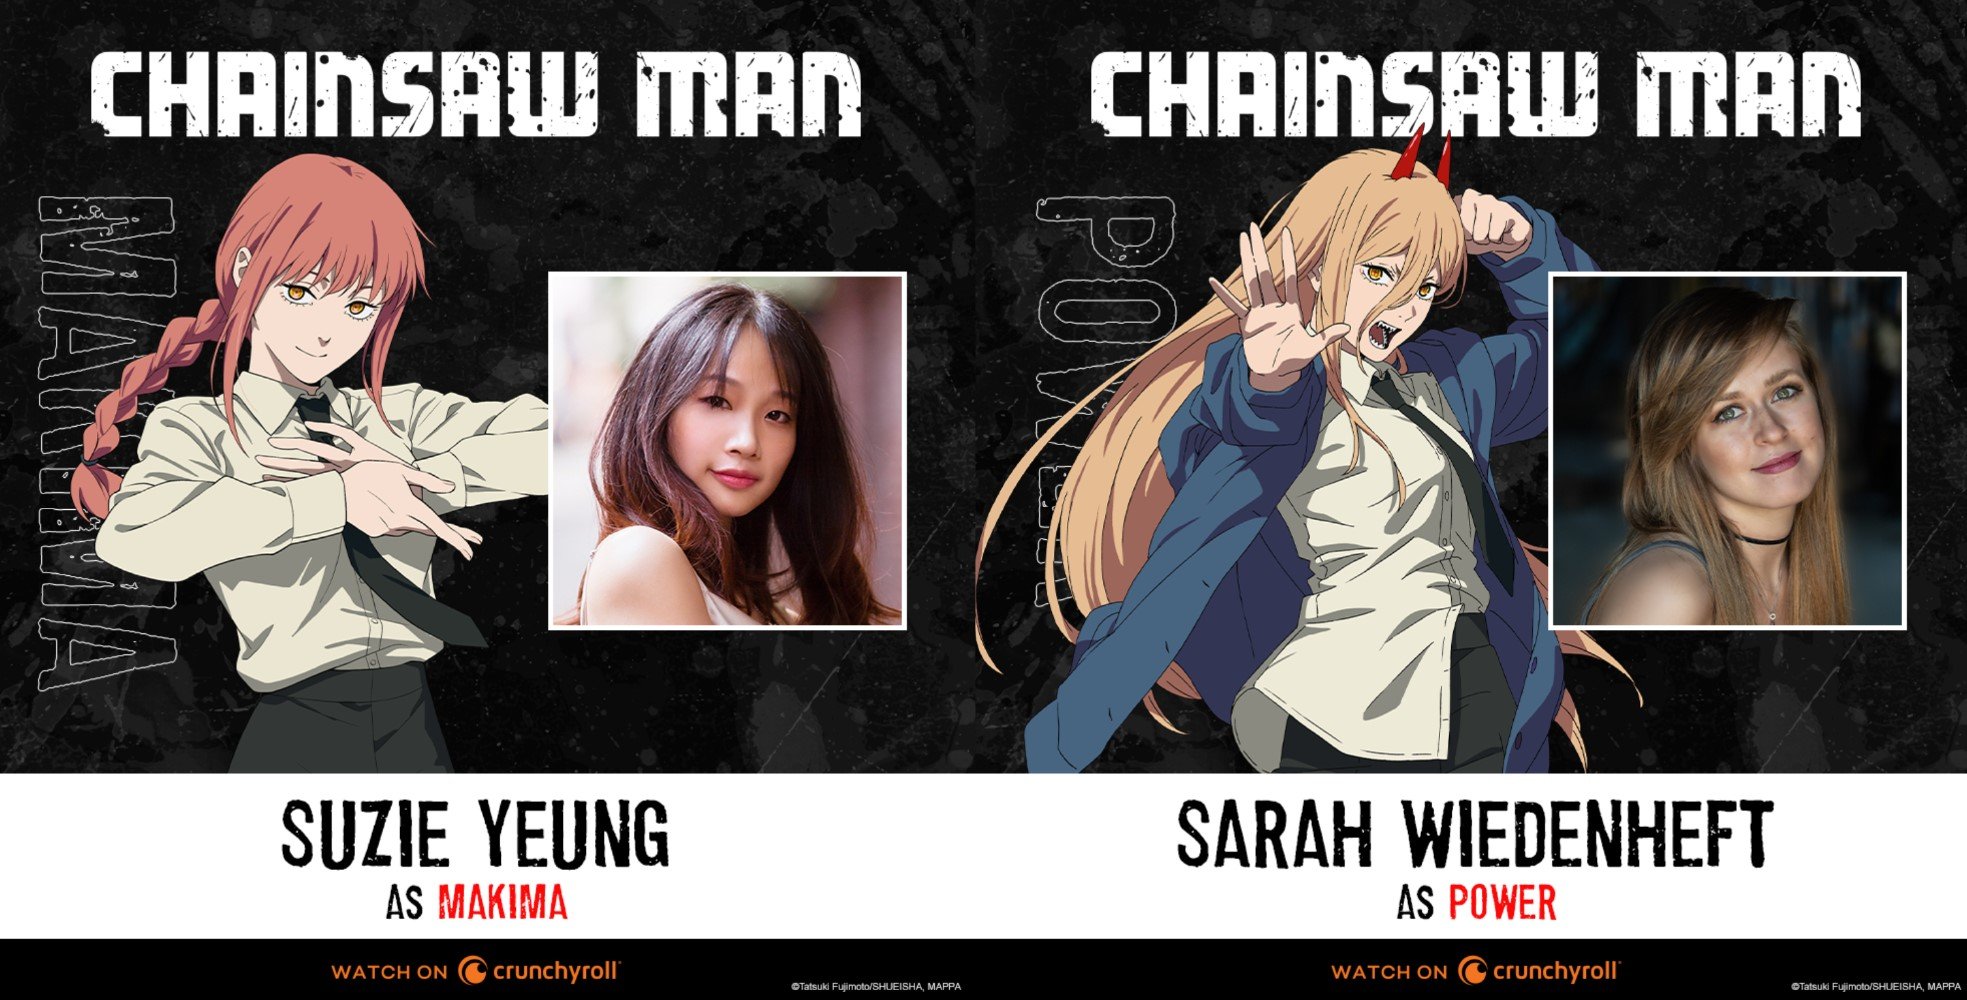 Weeb Central on Twitter CHAINSAW MAN is now streaming on Crunchyroll in  INDIA The anime is available in both Japanese with Eng subs amp Eng dub  on Crunchyroll India httpstcoHHuYOaknhj  X